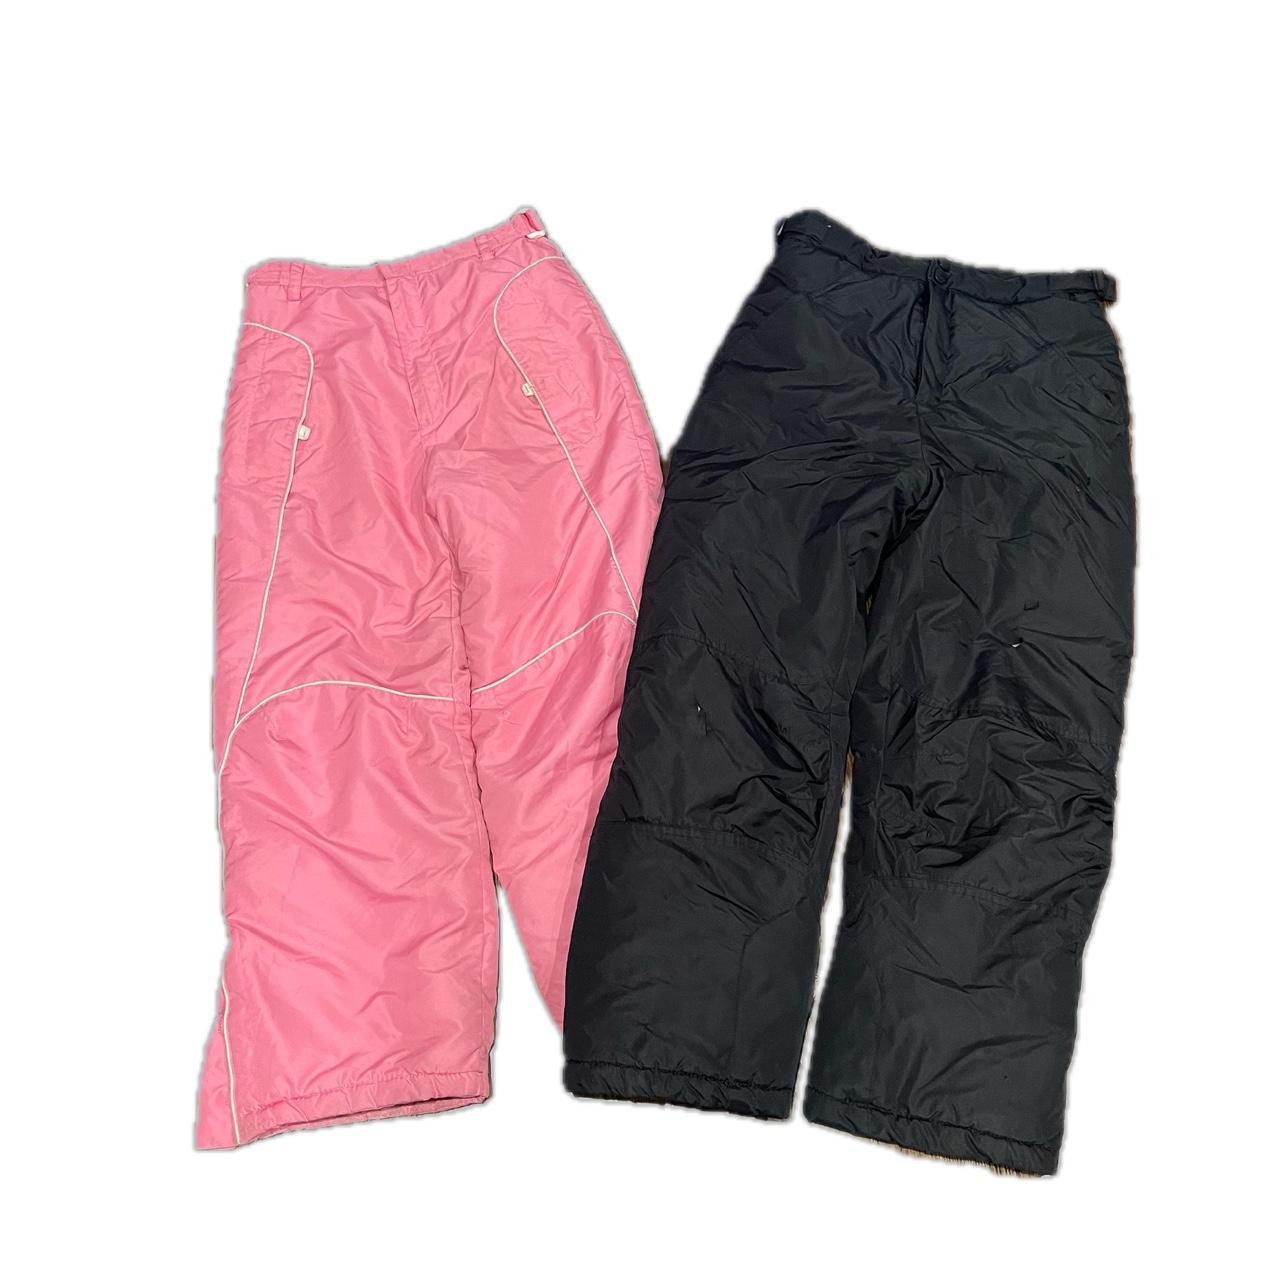 London Fog Women's Black and Pink Joggers-tracksuits